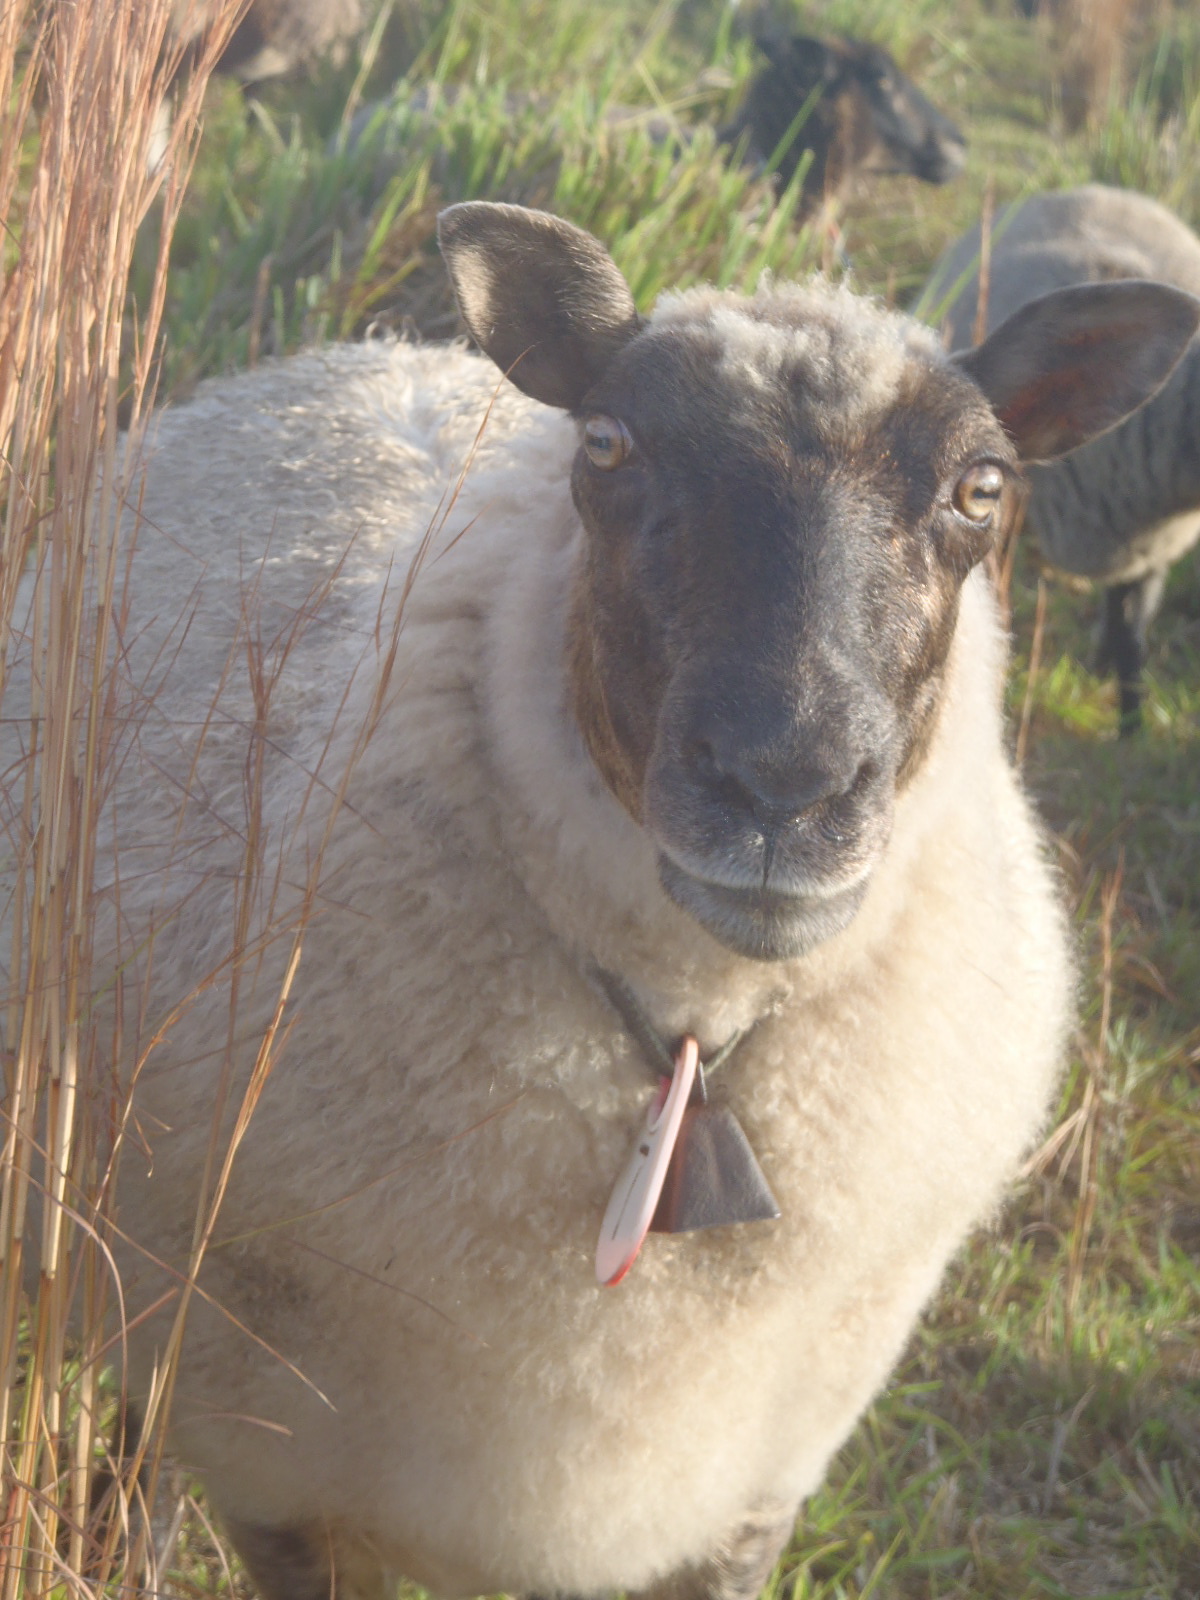 Sheep and wool crafts, click here.